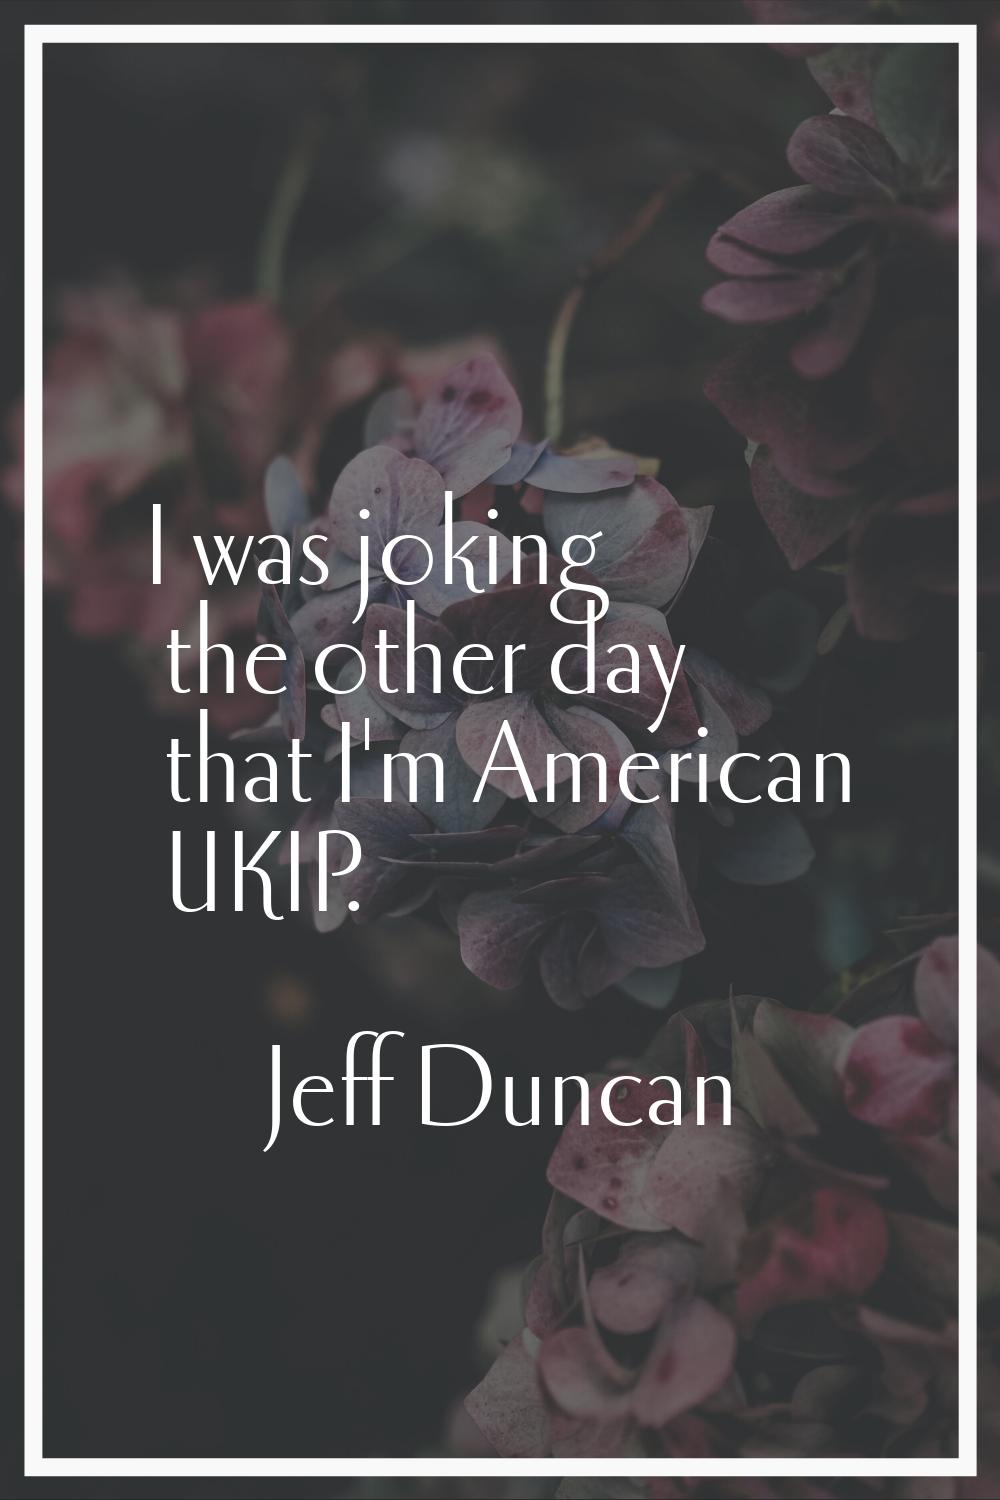 I was joking the other day that I'm American UKIP.